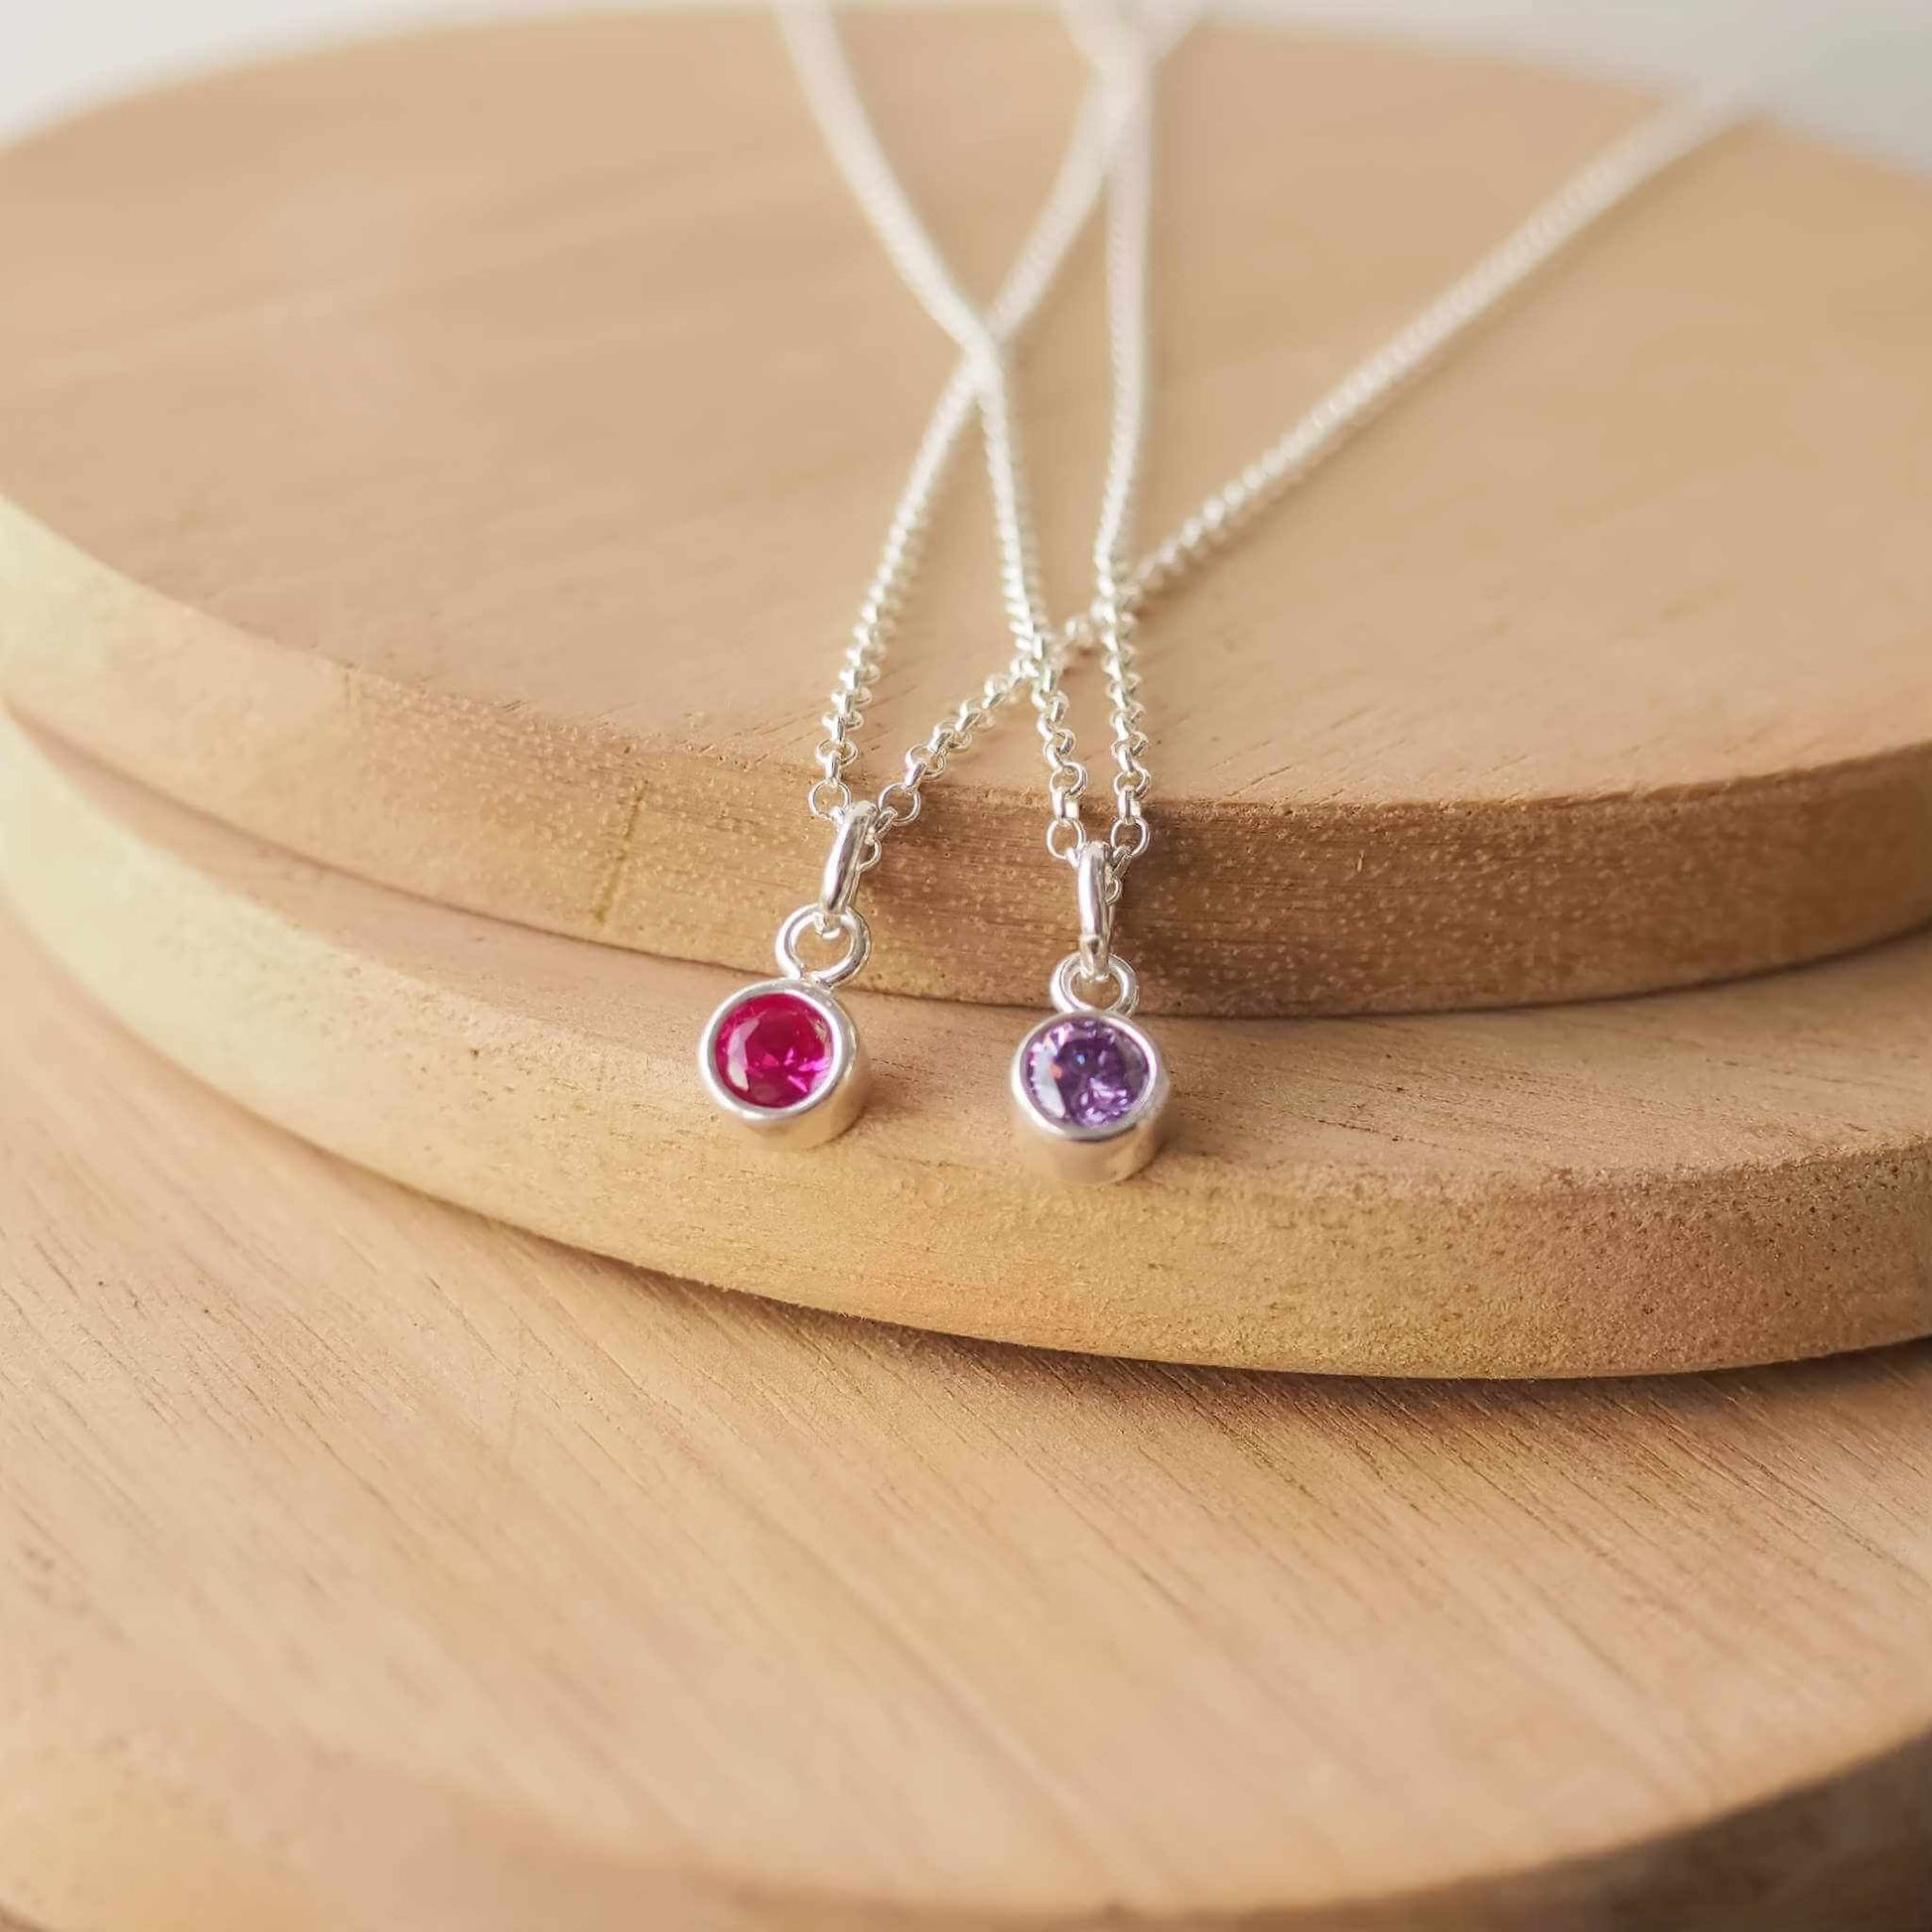 Two gemstone pendants made from Sterling SIlver and round cubic zirconia in purple and pink. Birthstones for February, July and October. Handmade by Maram Jewellery in Scotland